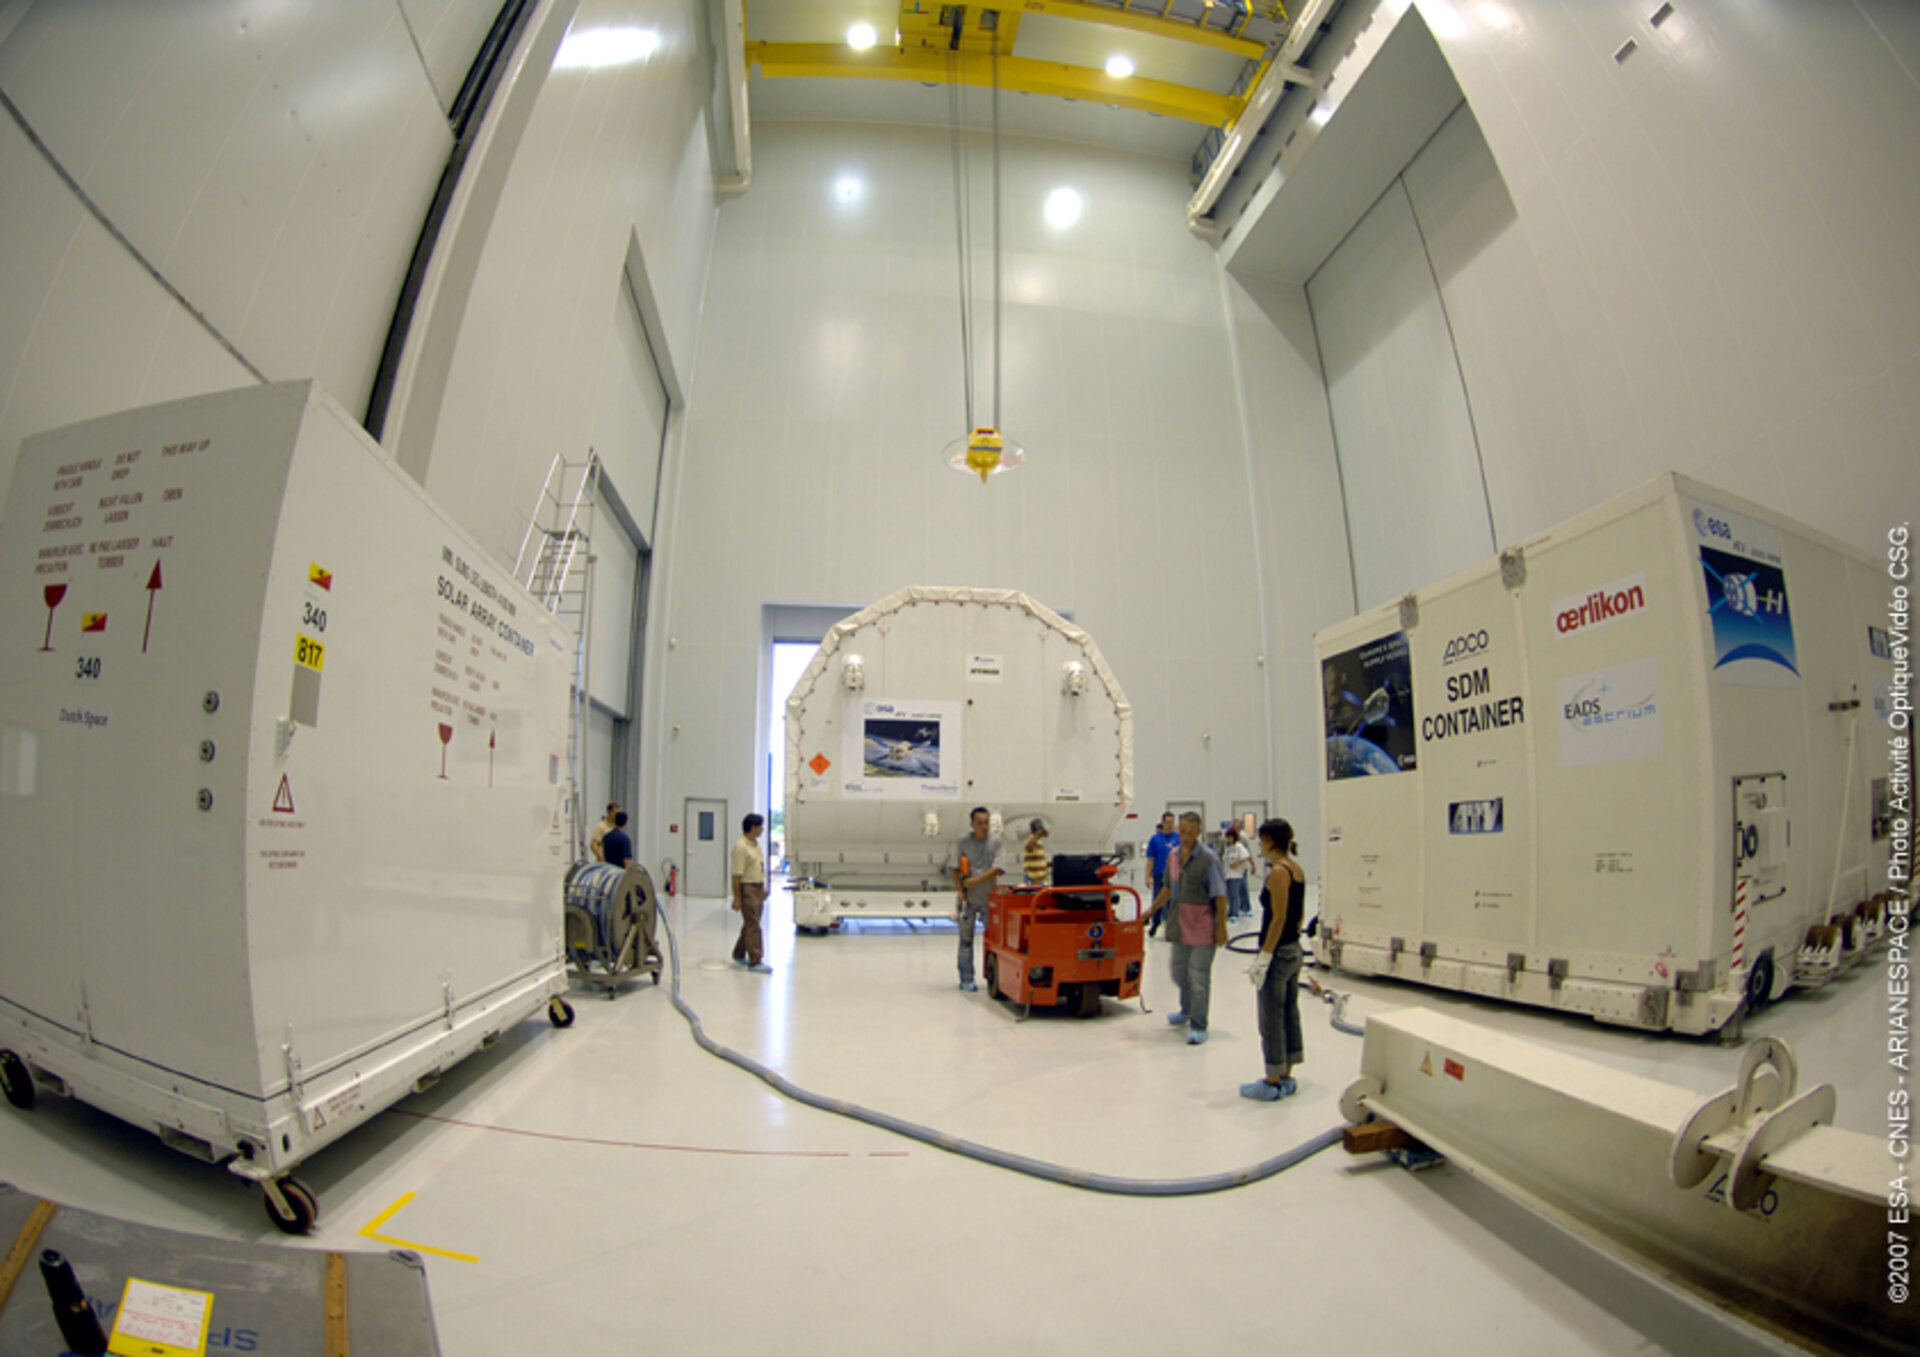 ATV transportation containers inside the S5 building at Europe's Spaceport in Kourou